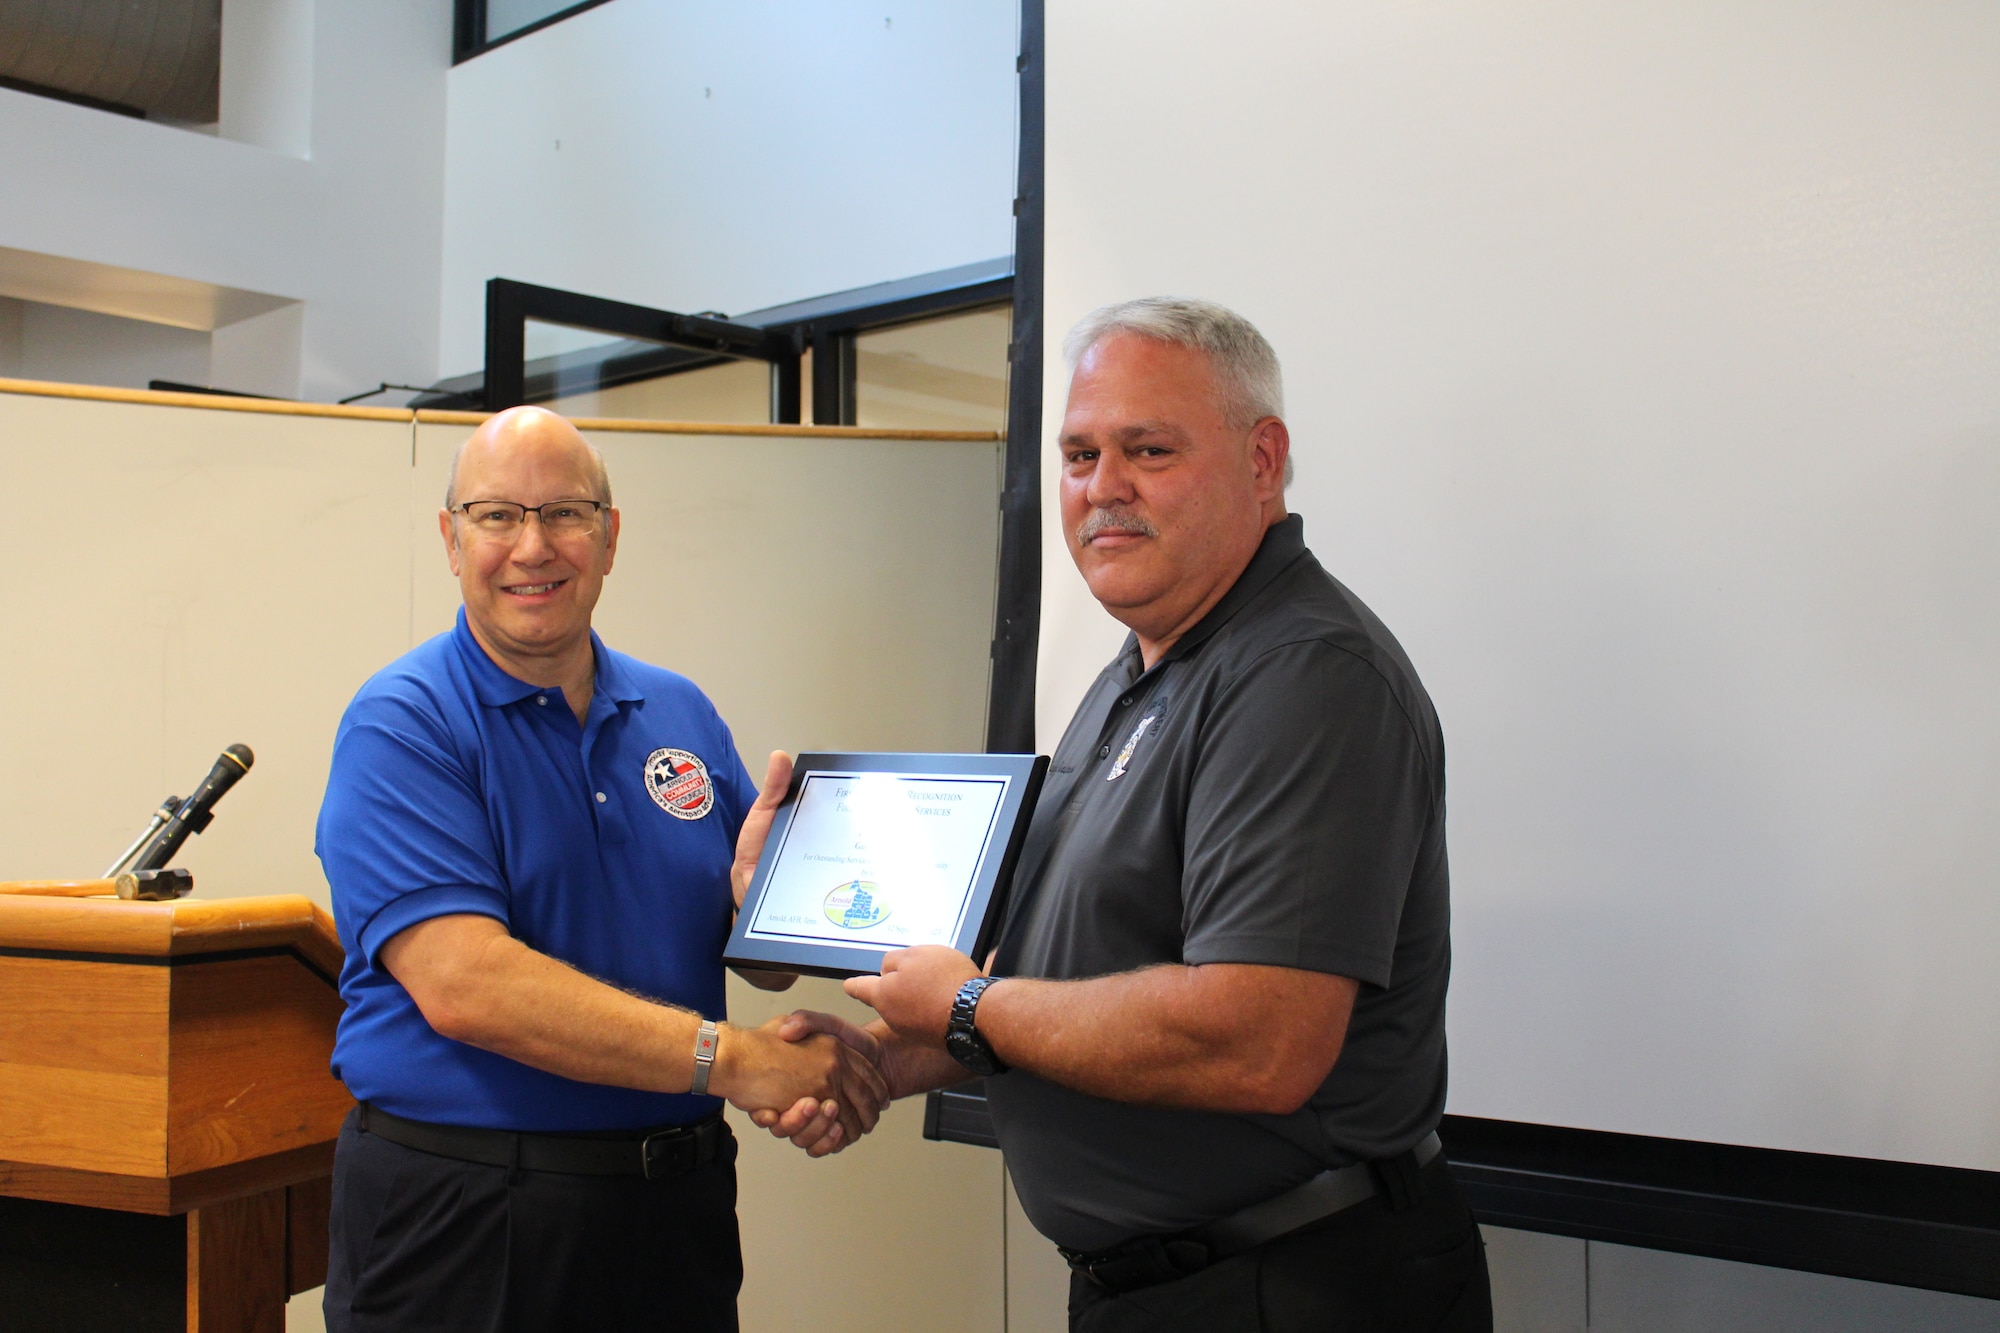 Glenn Liston, Arnold Community Council president, left, presents Arnold Air Force Base Fire and Emergency Services Fire Inspector Guy Chastain with a plaque after recognizing him as an outstanding first responder during a meeting of the ACC at the Gossick Leadership Center at Arnold AFB, Tenn., headquarters of Arnold Engineering Development Complex, Sept. 12, 2023. Chastain was one of three recipients of the 2023 Arnold Community Council First Responder Awards. (U.S. Air Force photo by Kali Bradford)